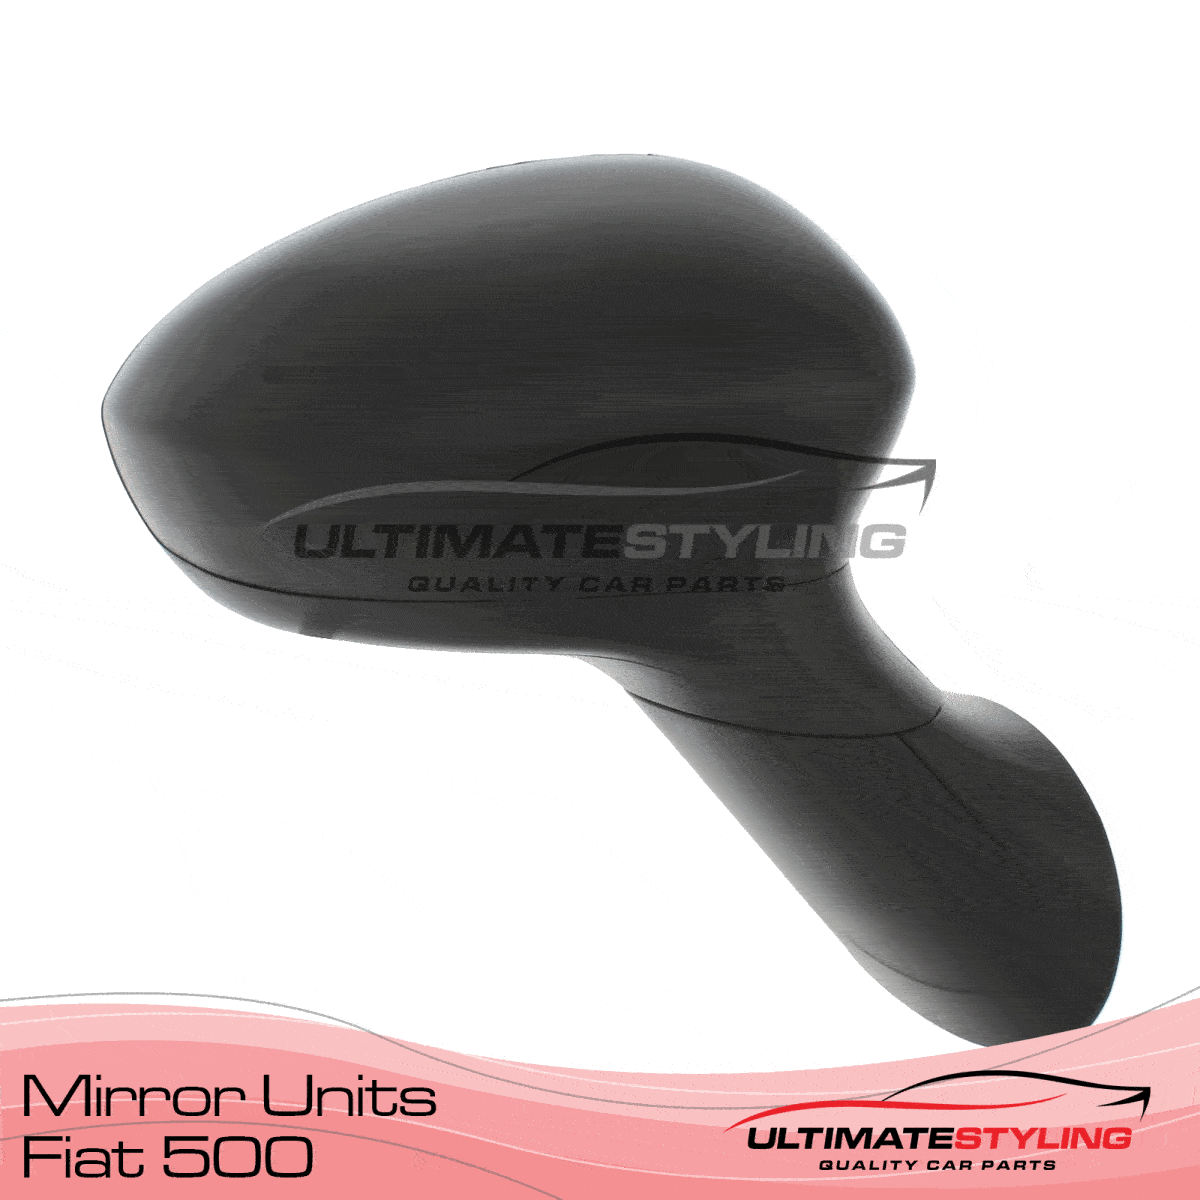 360 degree view of a Fiat 500 wing mirror